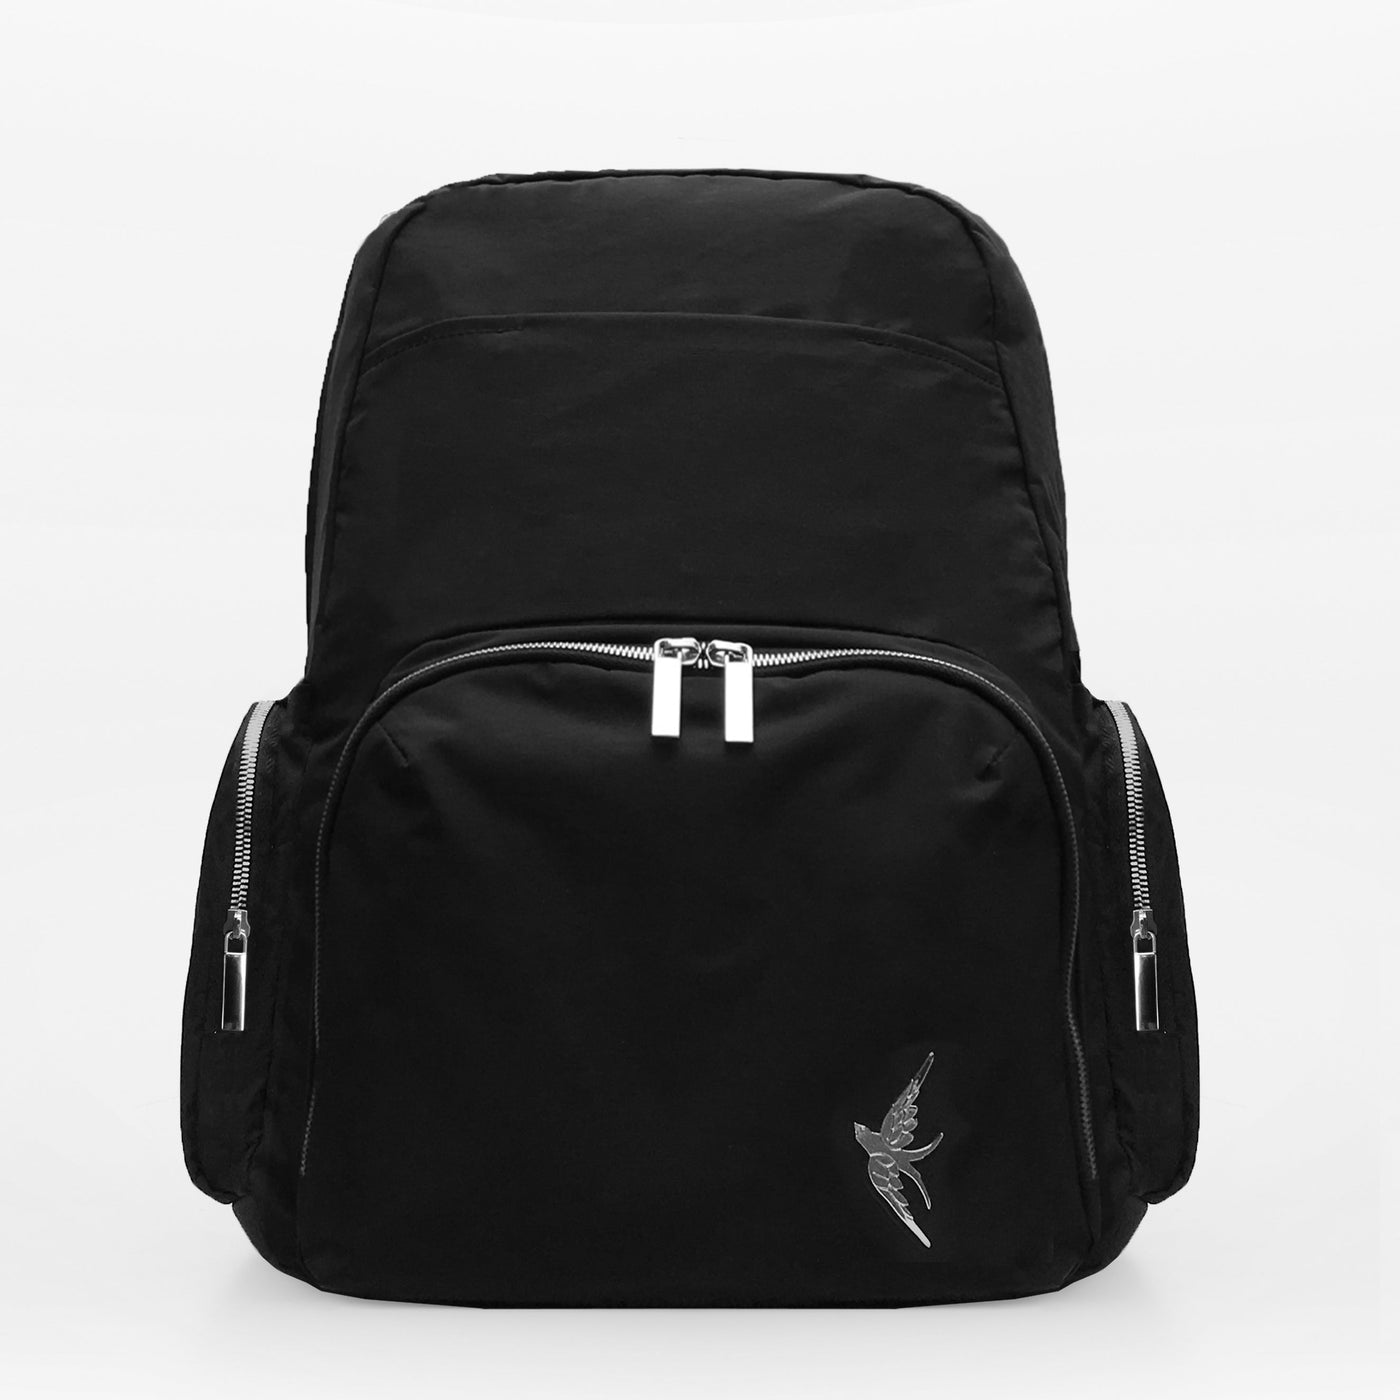 Laptop Backpack with the Pop Butterfly Print